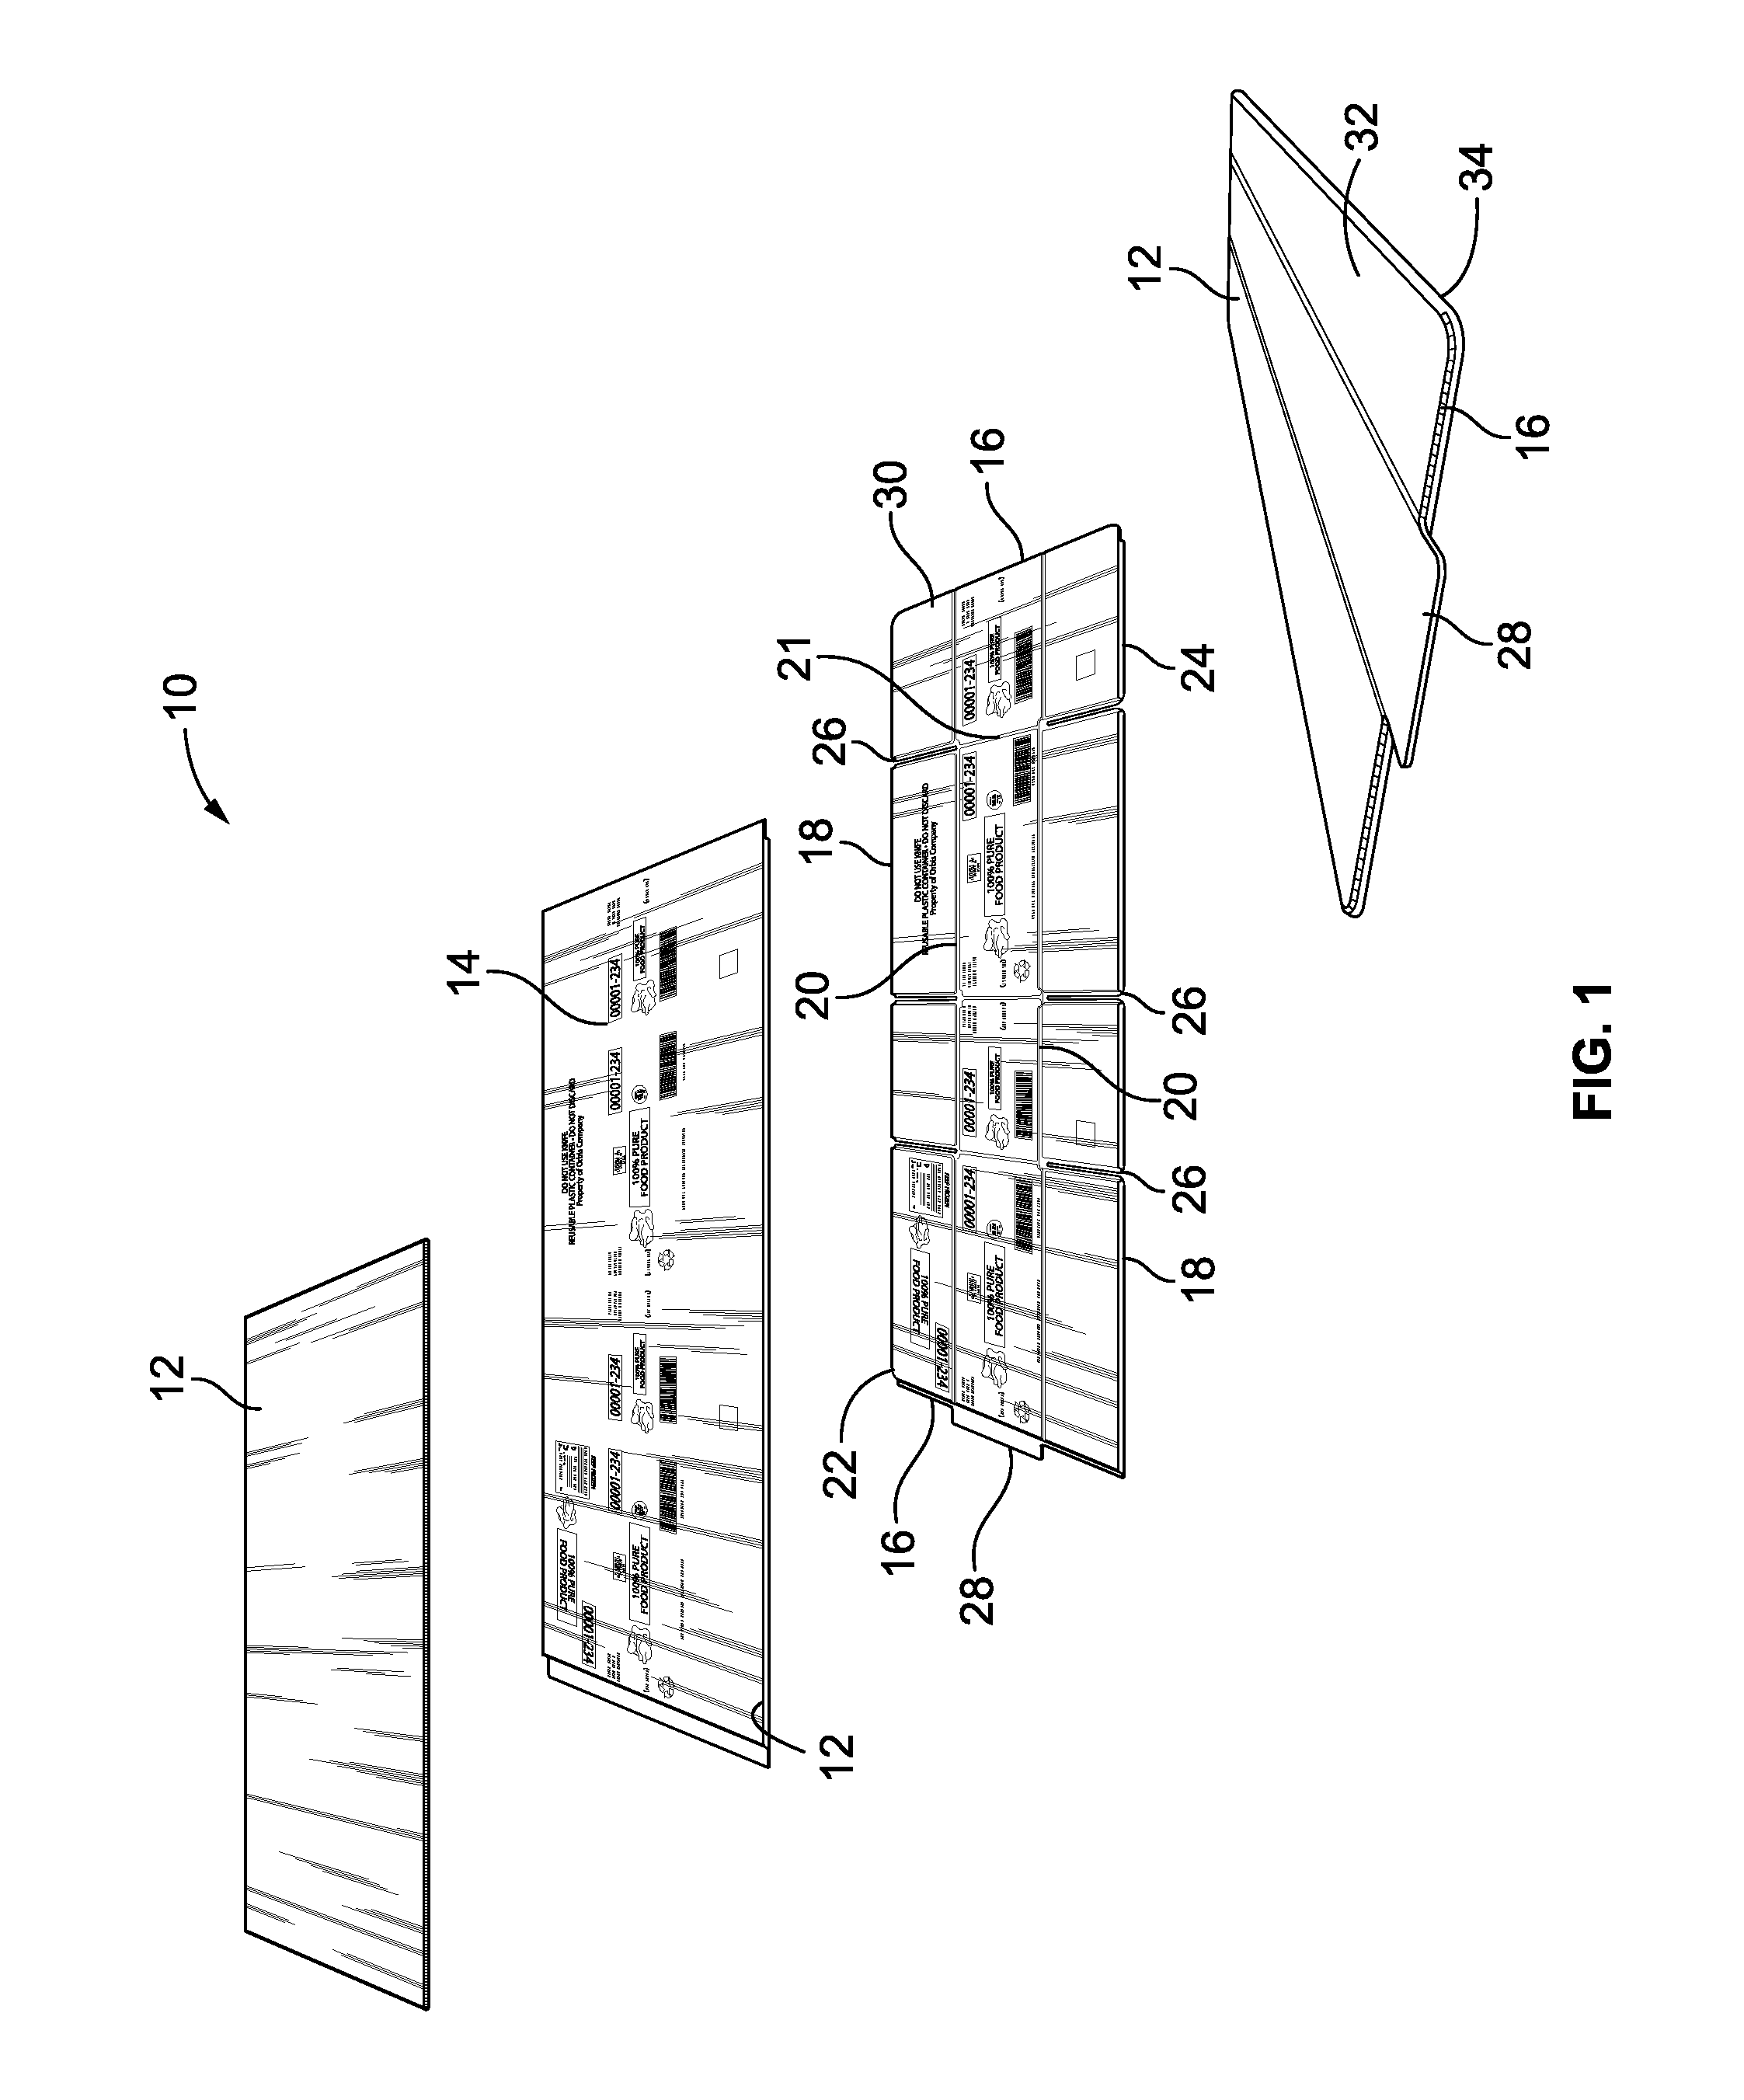 Process for Forming Plastic Corrugated Container with Ultrasonically Formed Score Lines